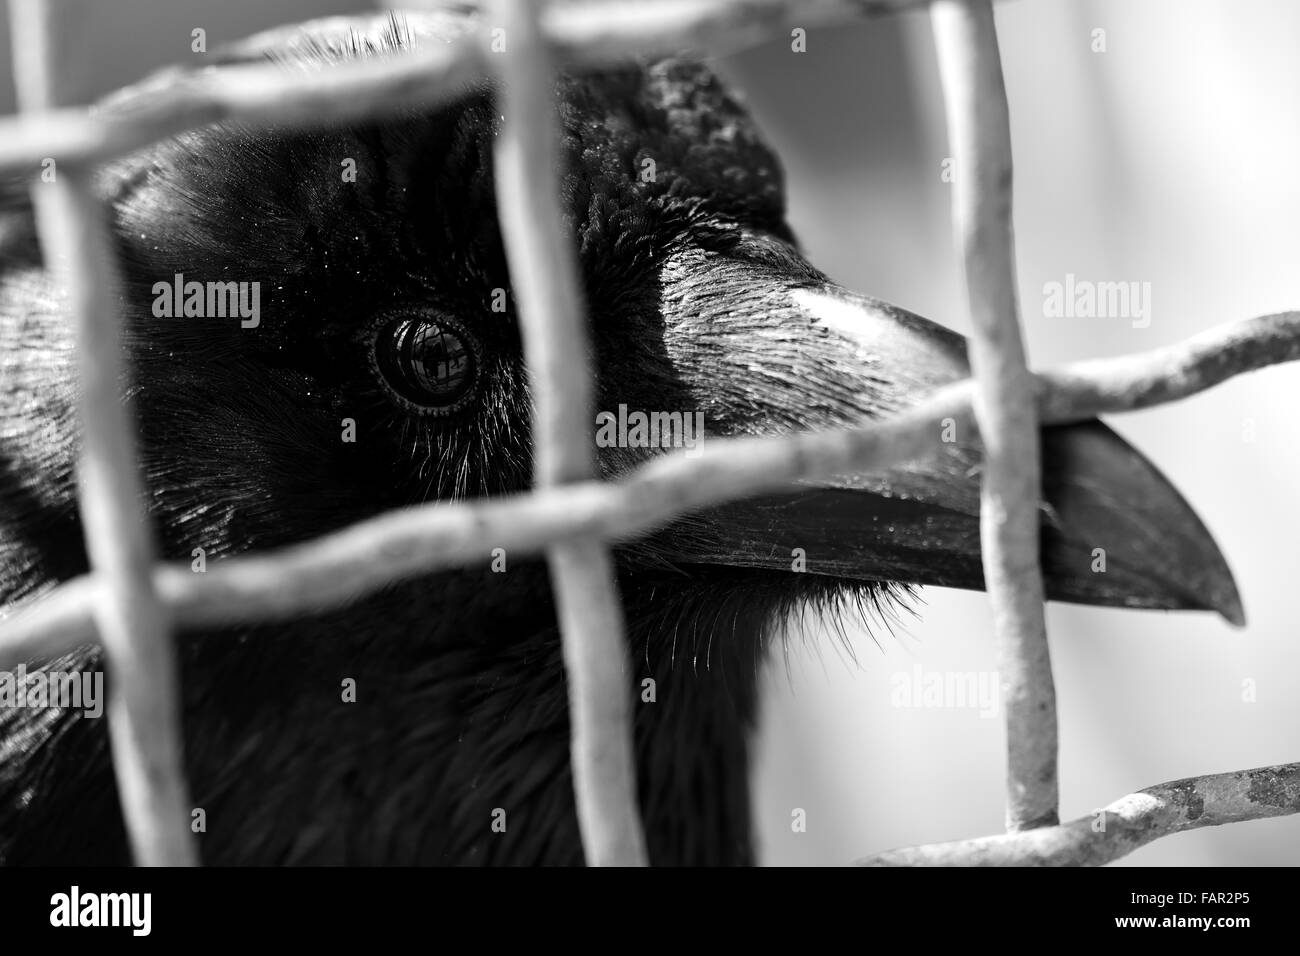 Carrion crow (Corvus corone) in a cage. A close-up of a crow's head, showing sharp beak and glossy eye, in black and white Stock Photo